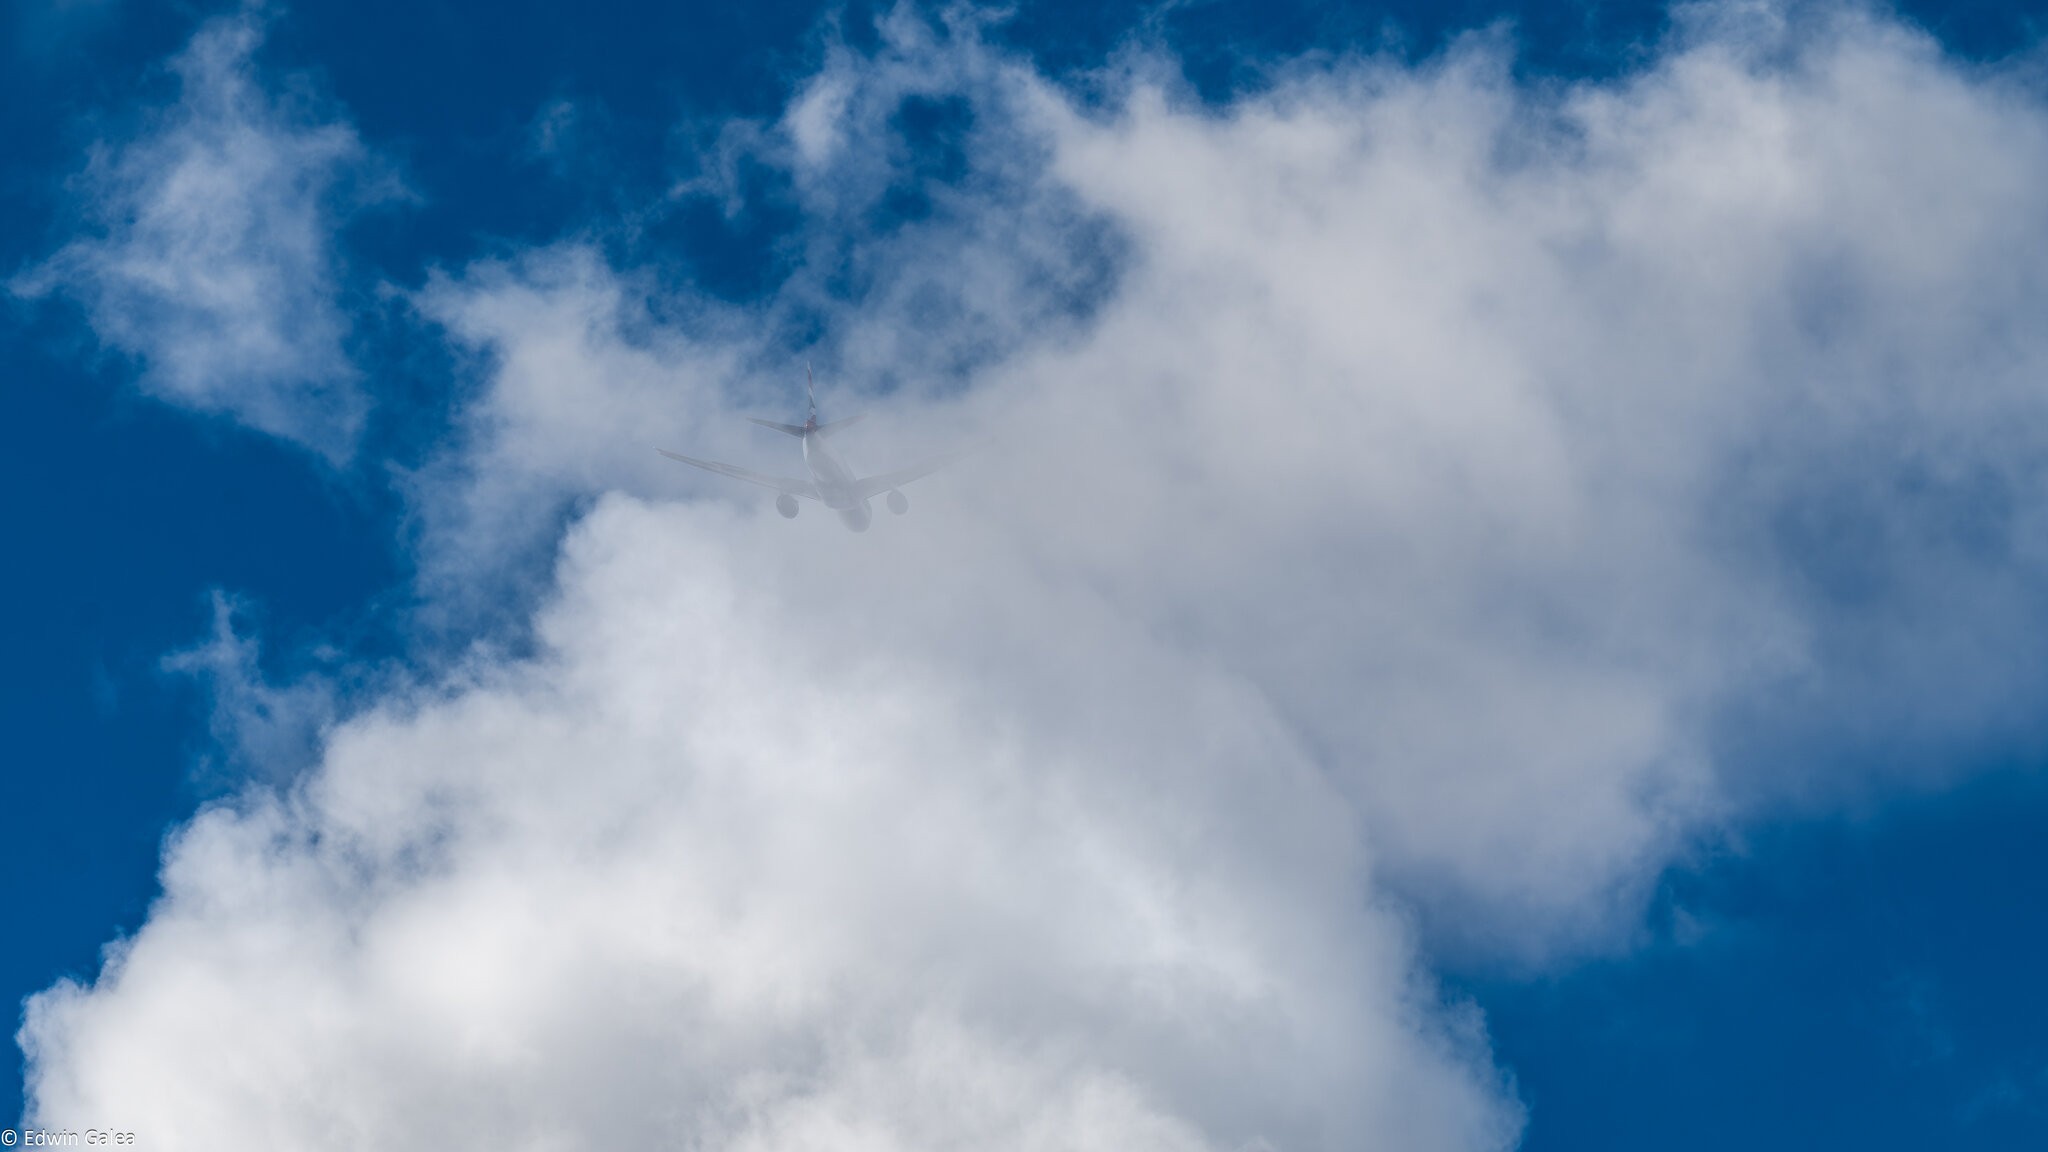 aircraft_in_clouds_hdr-3.jpg